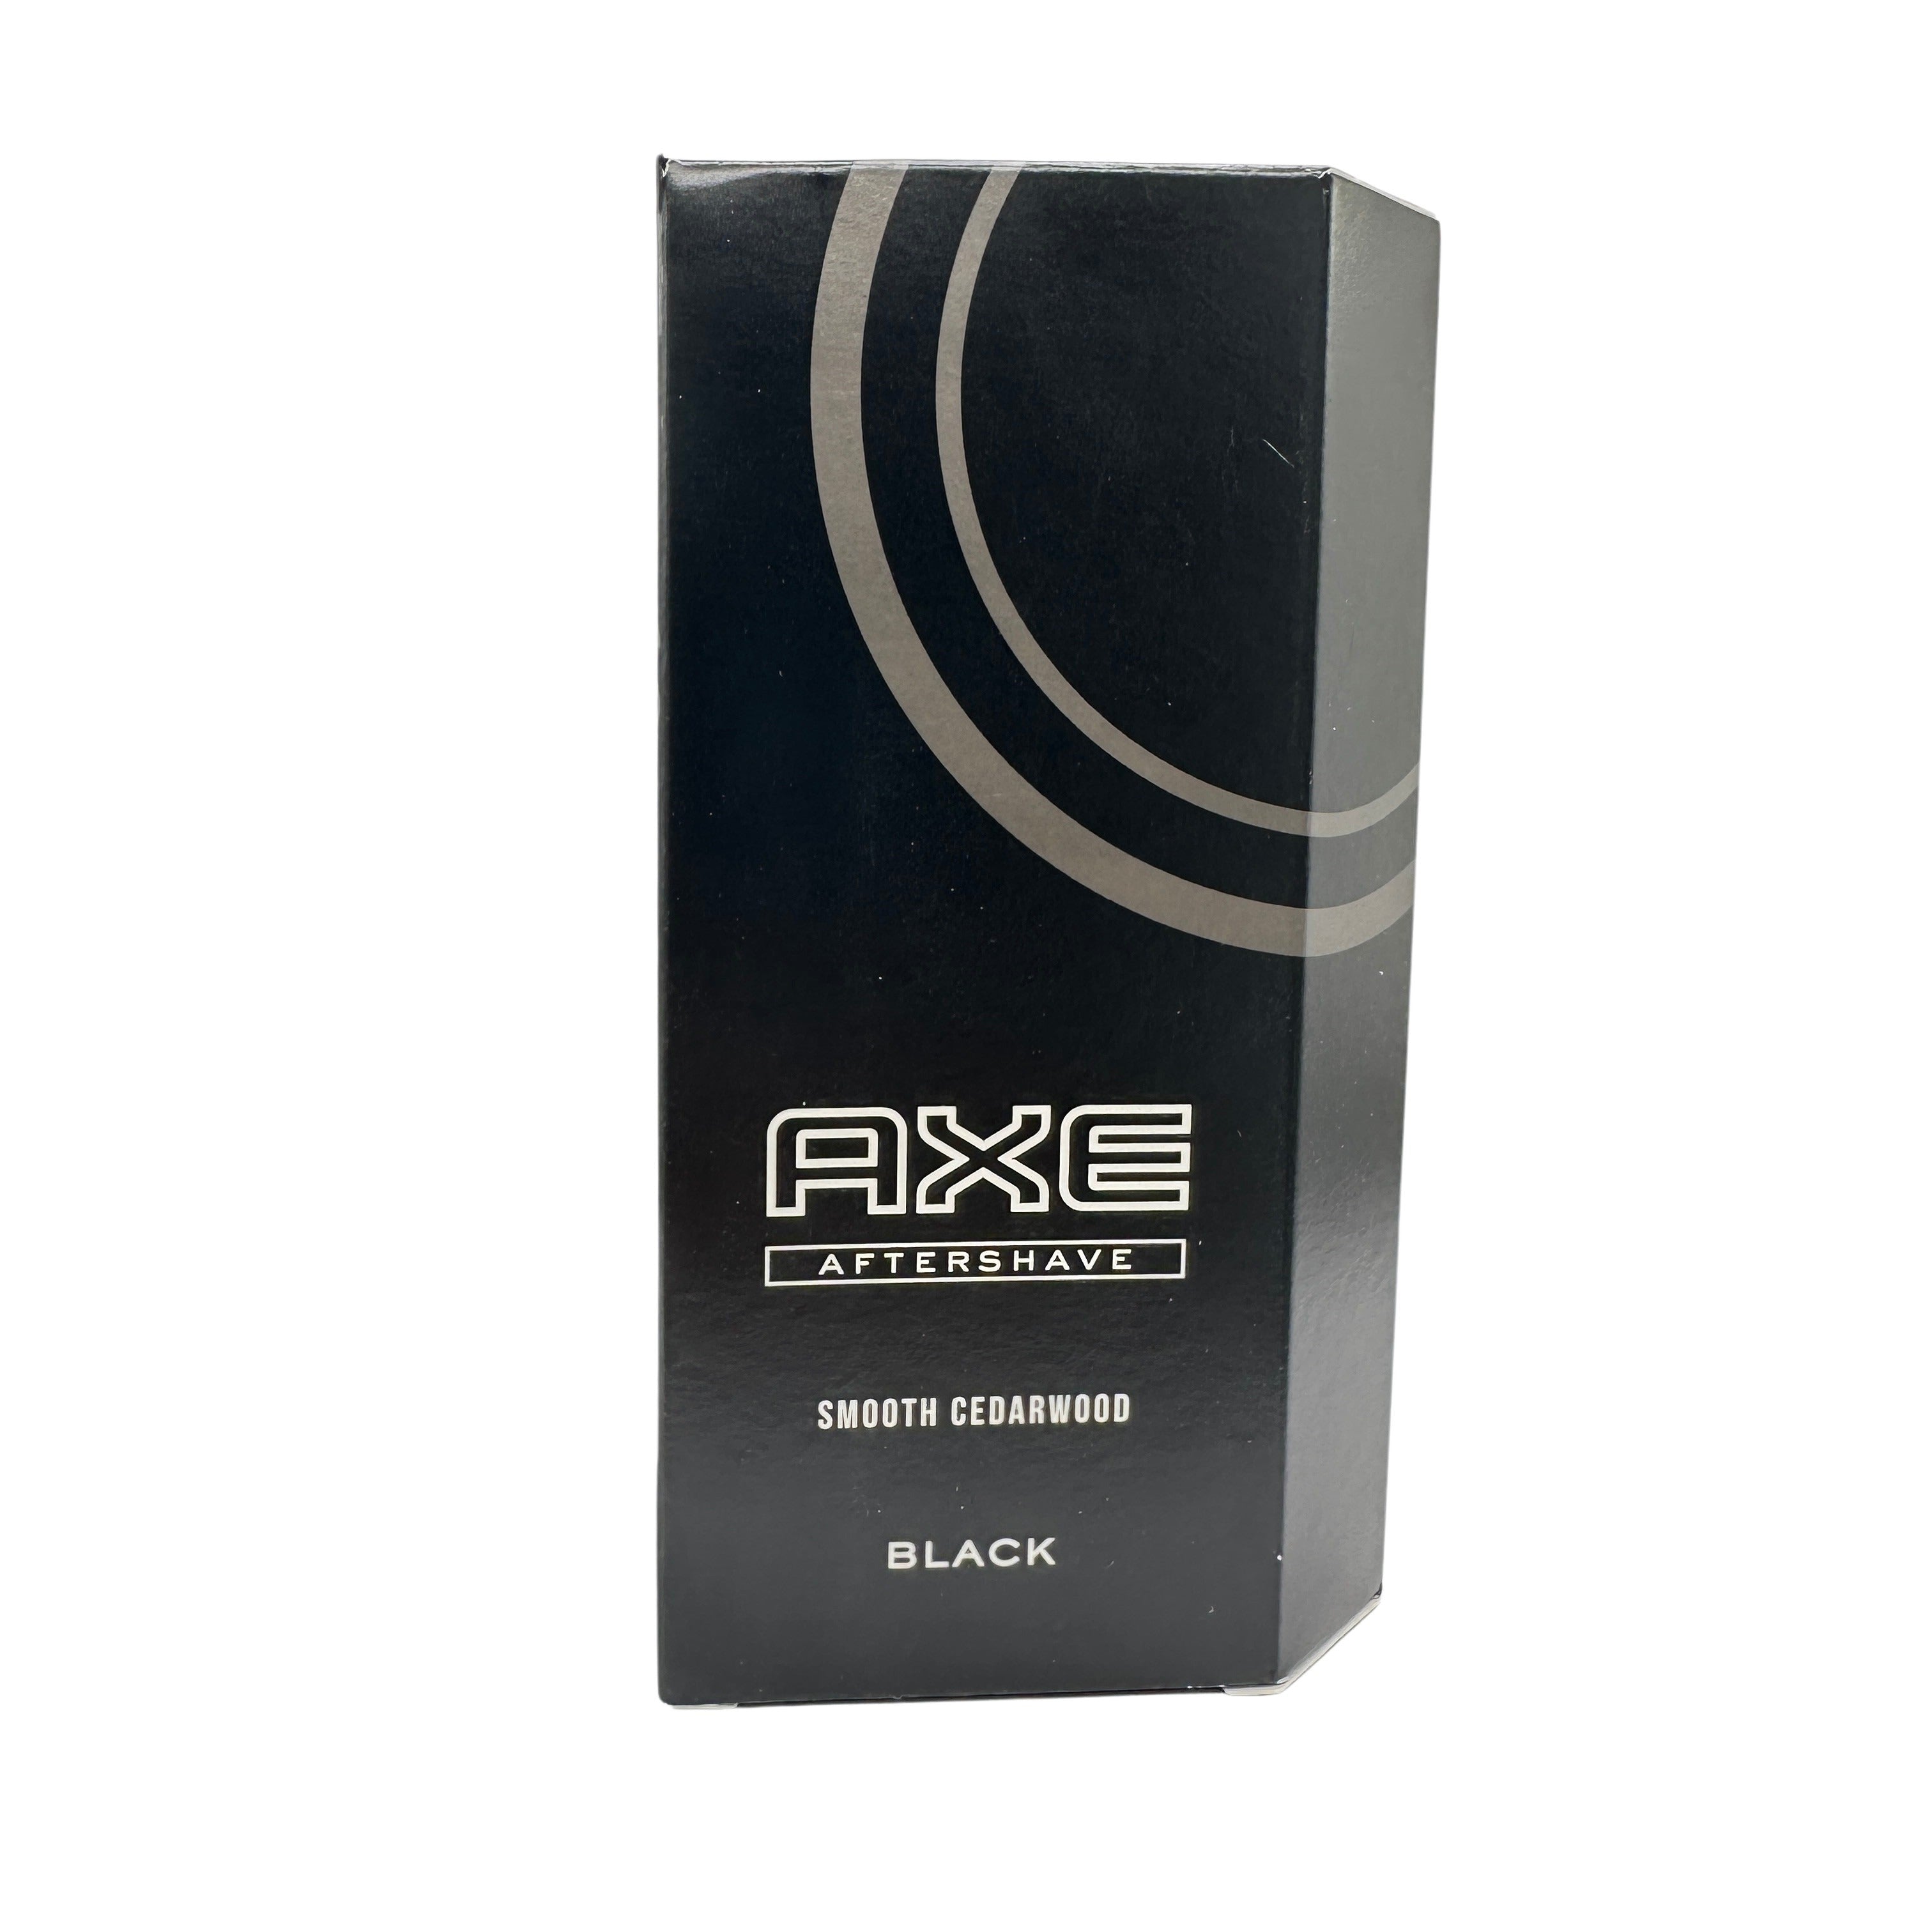 Axe Black aftershave 100ml